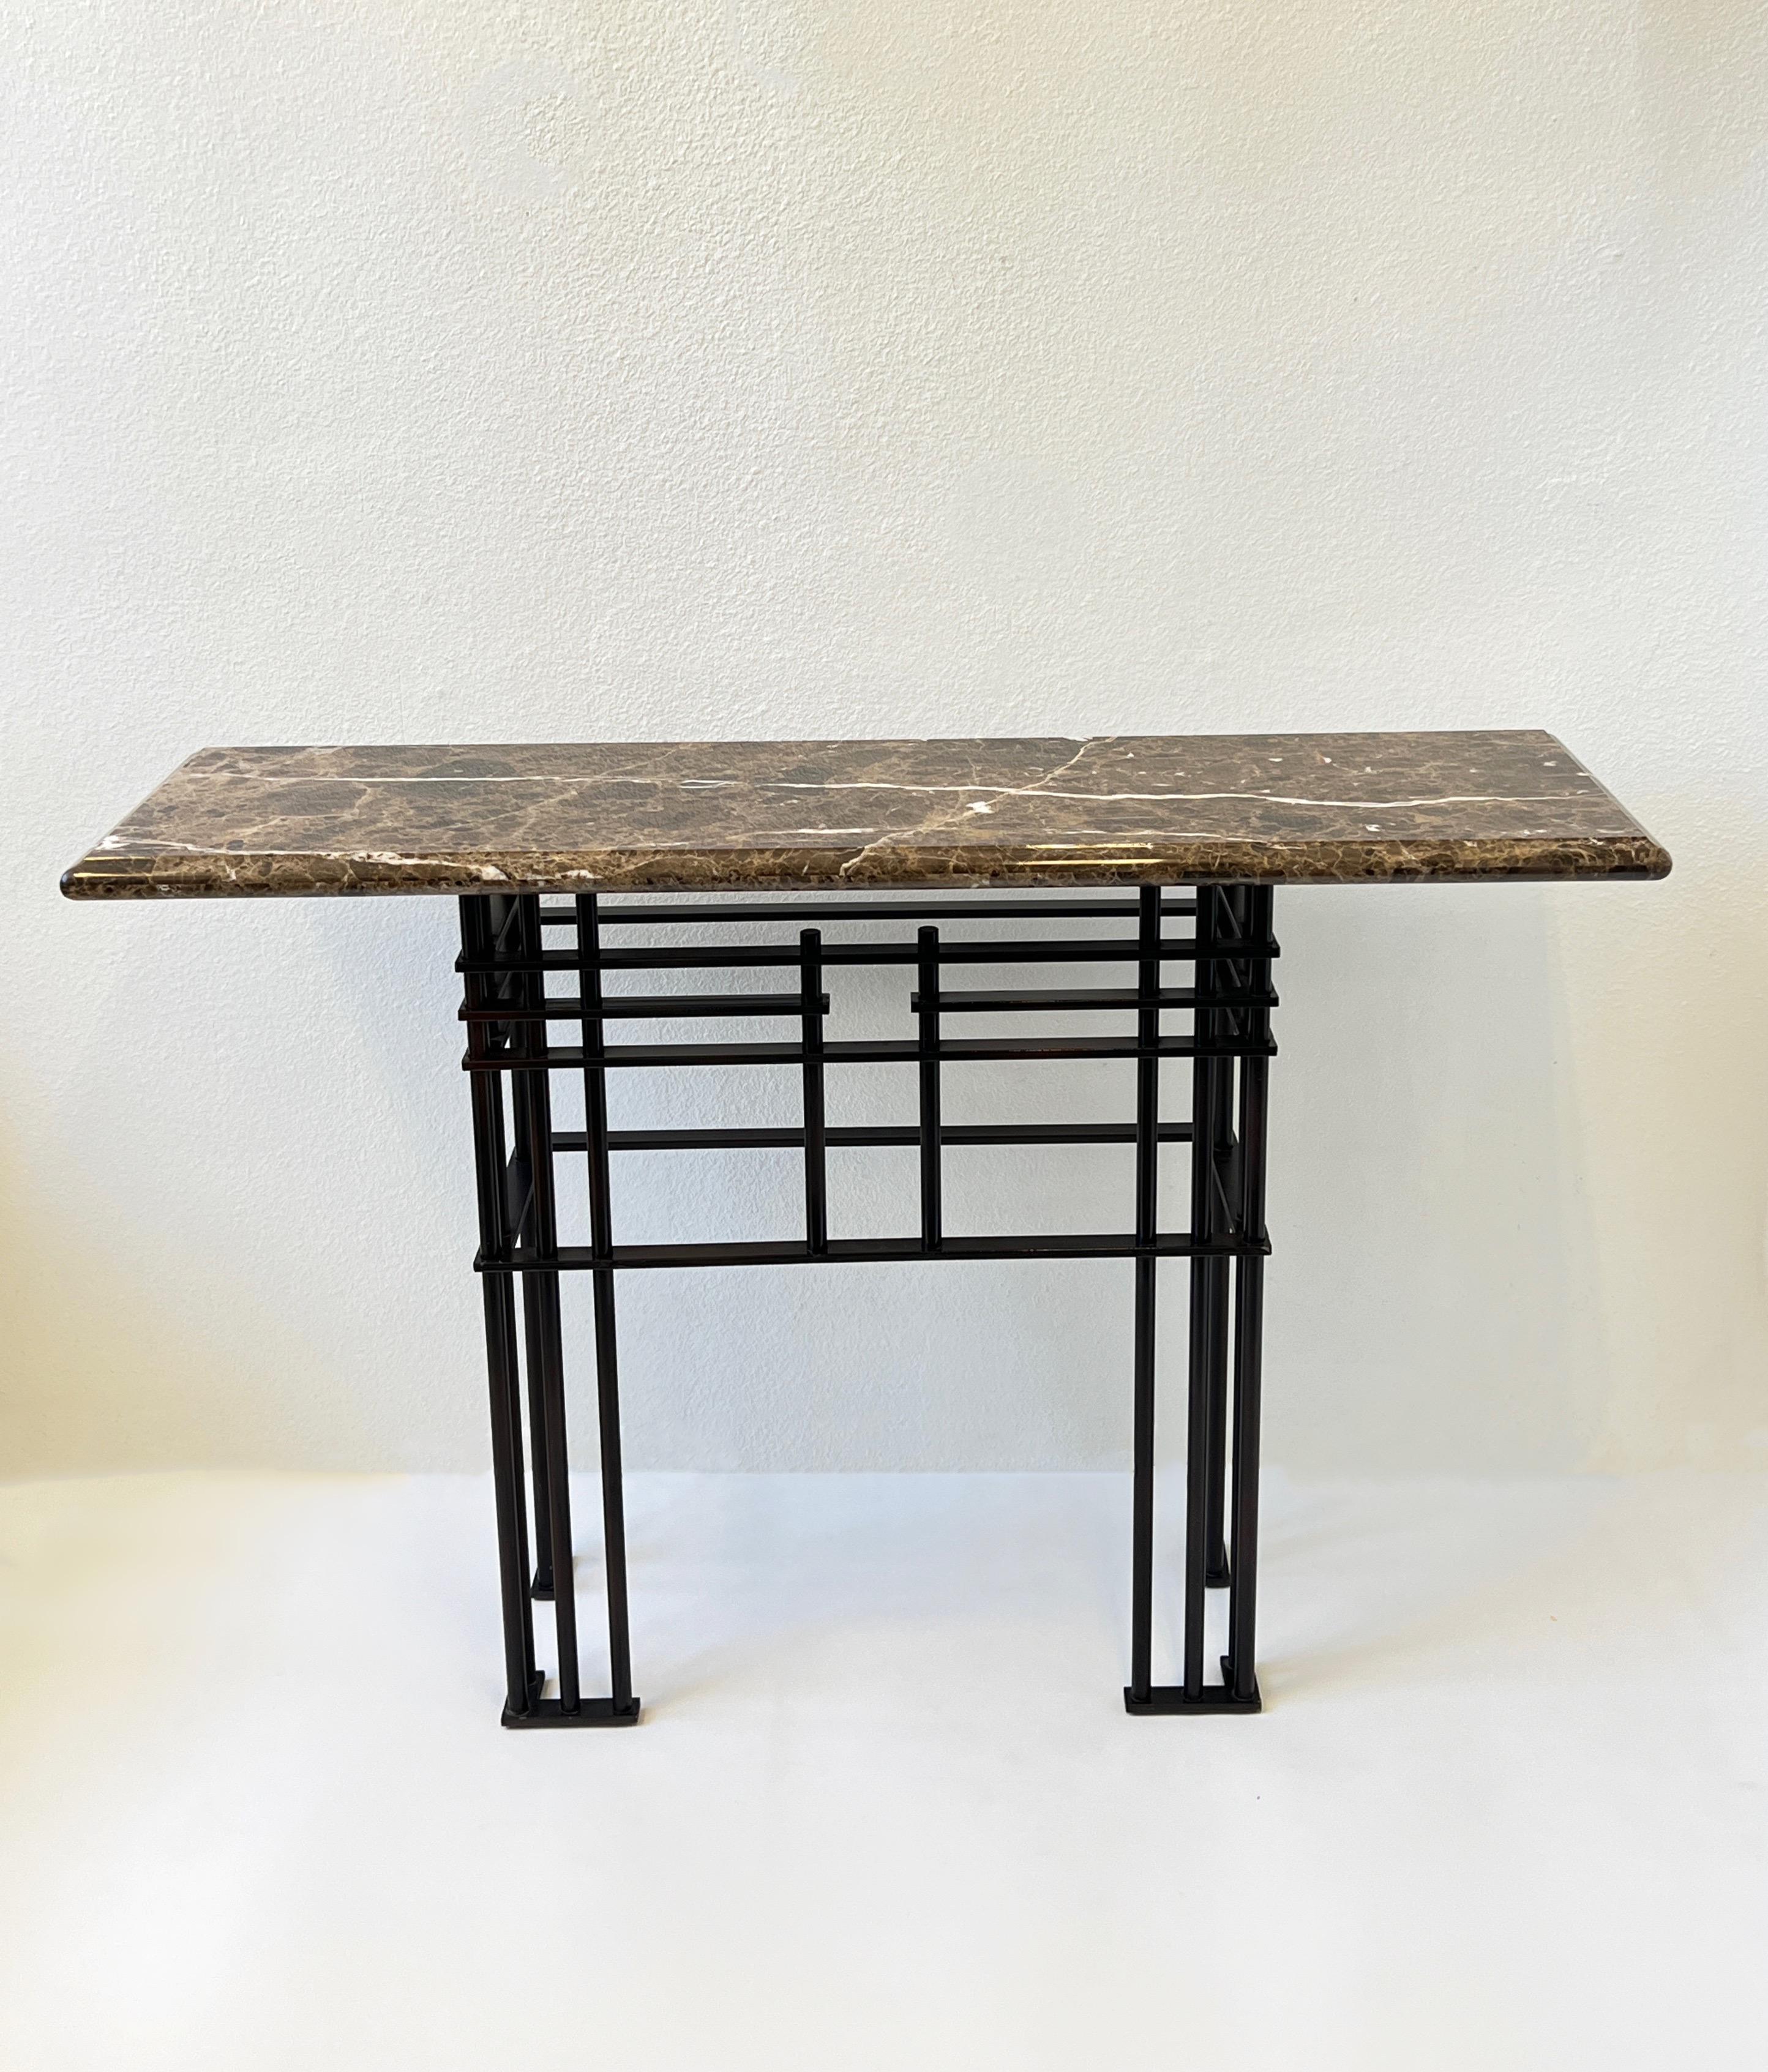 1980’s Console table designed by French architect Jean Michele Wilmotte for Mirak. 
Constructed of brown tones marble top with a steel powder coated bronze finish base. 
Measurements: 55” wide, 17” deep, 36.25” high.